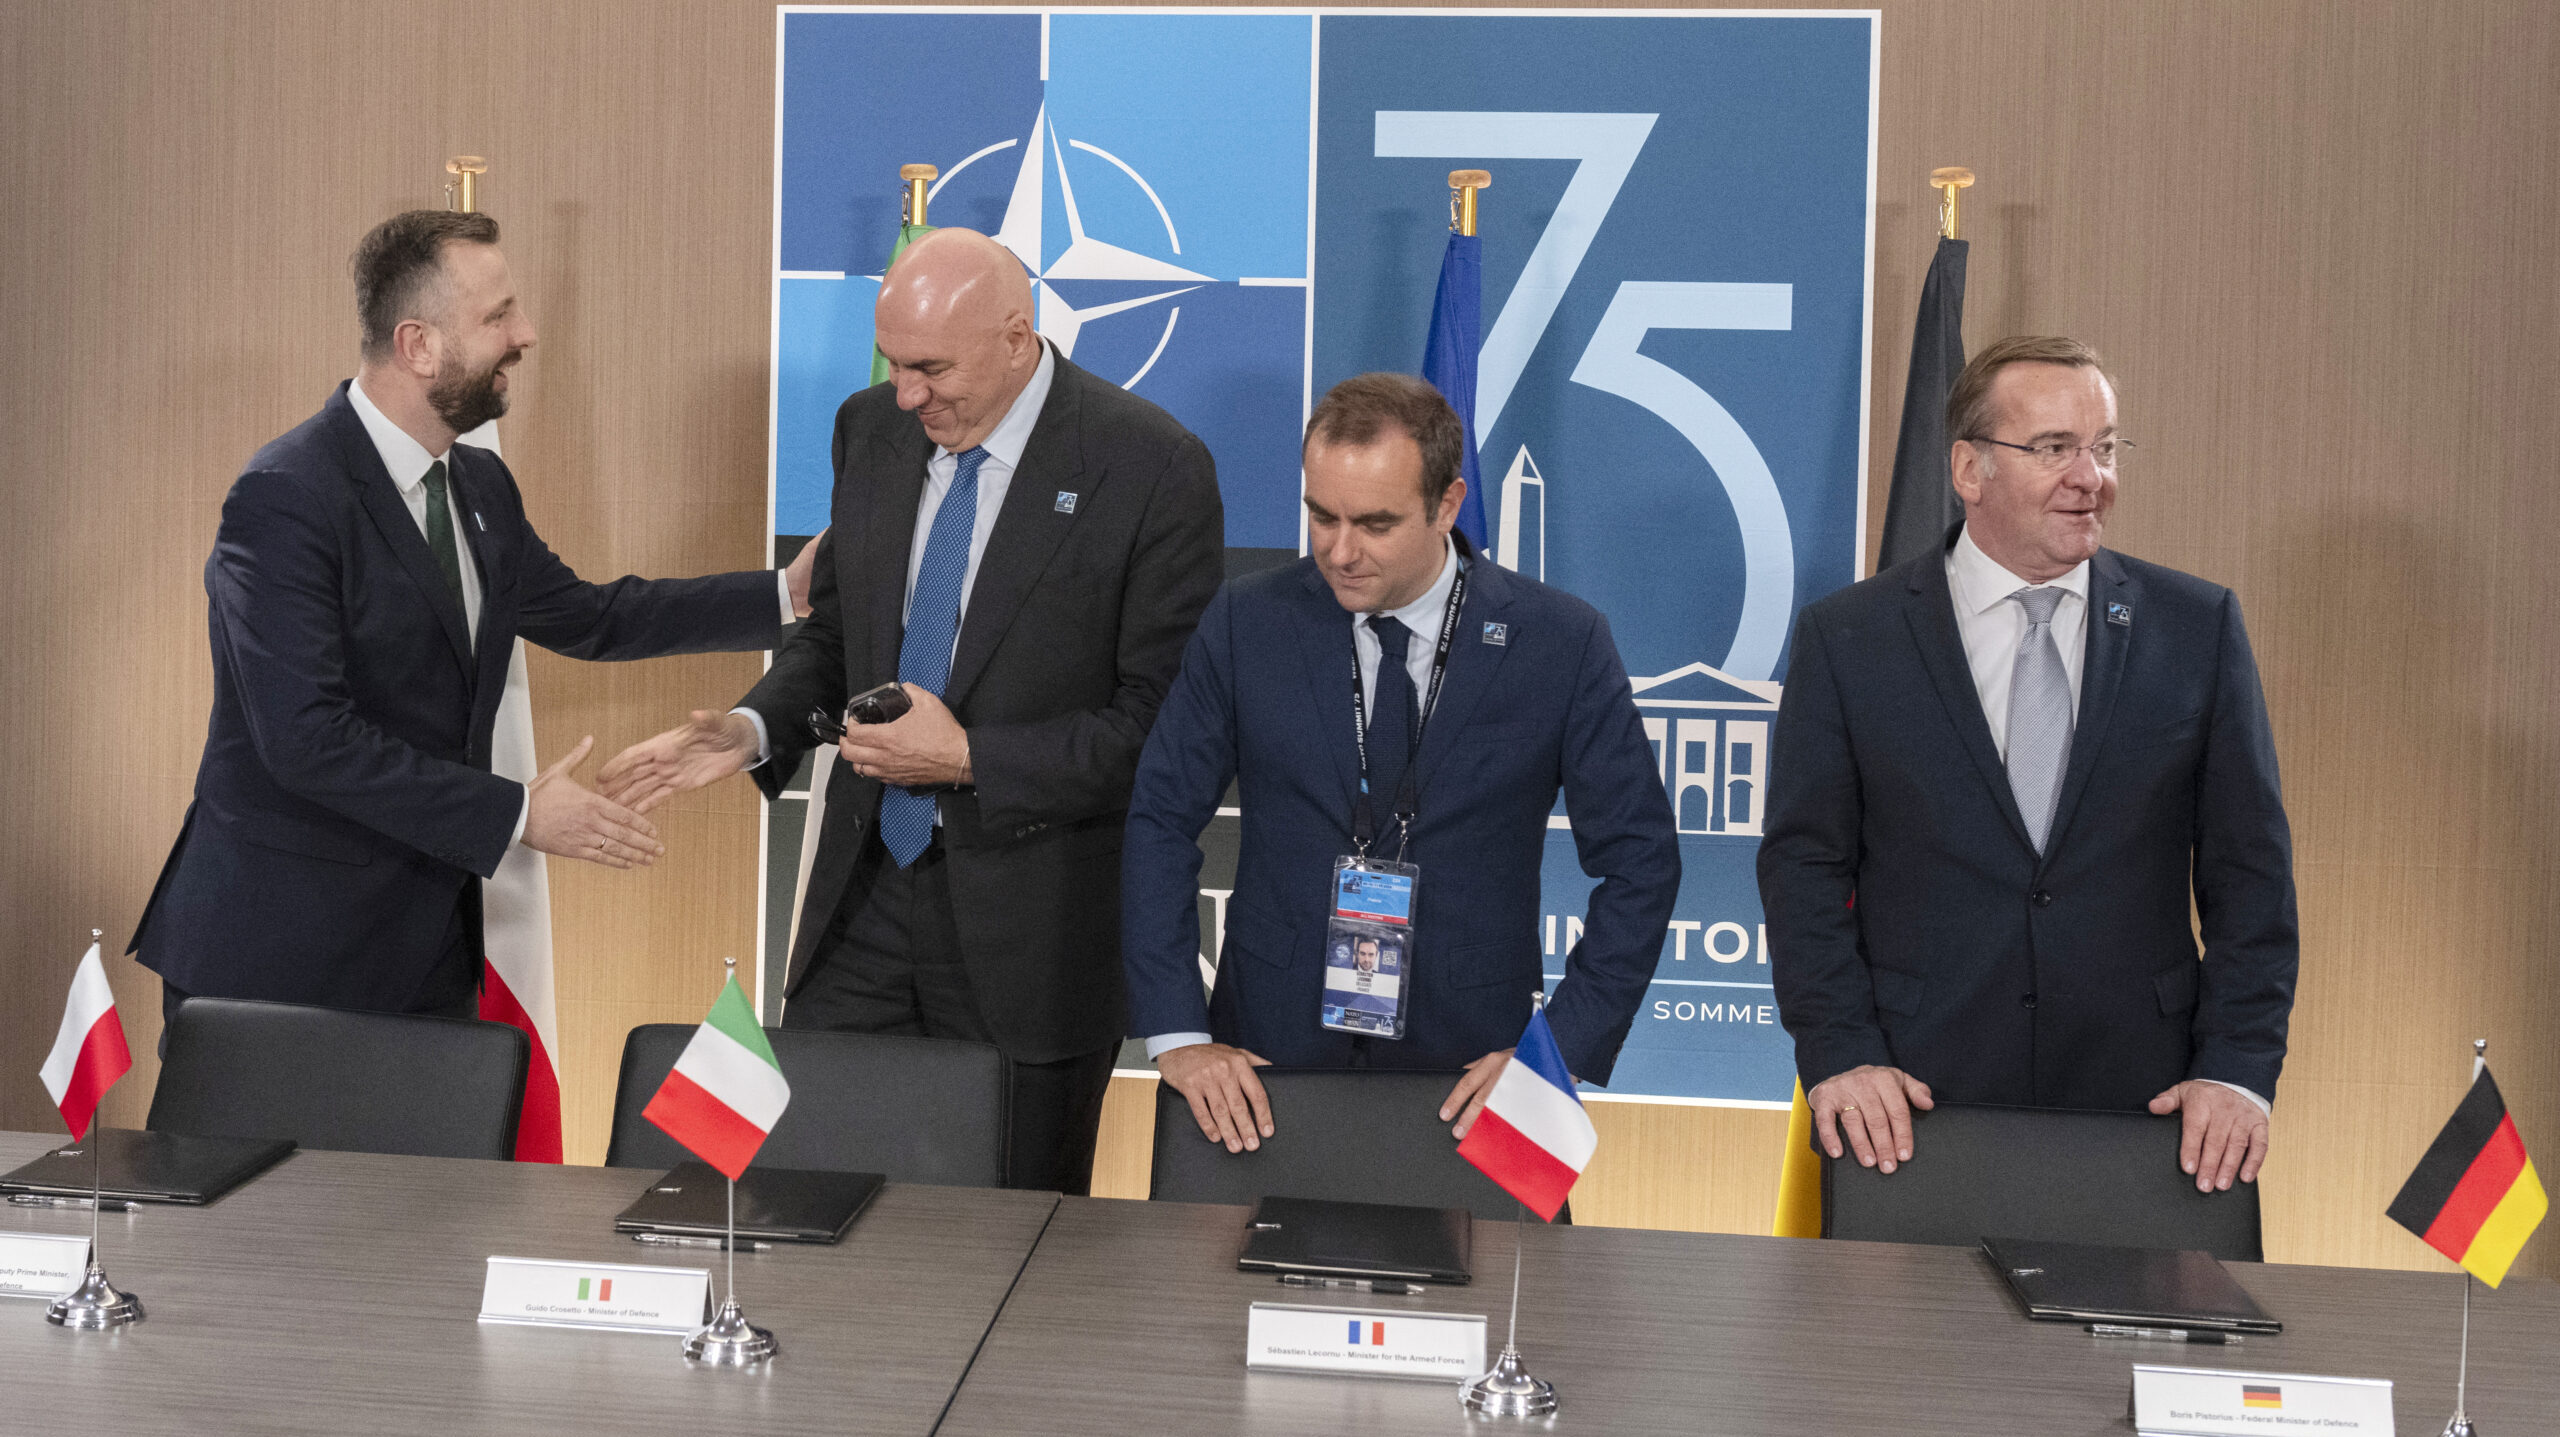 Let it go (long): France joins Germany, Italy and Poland in new ELSA long-range missile project